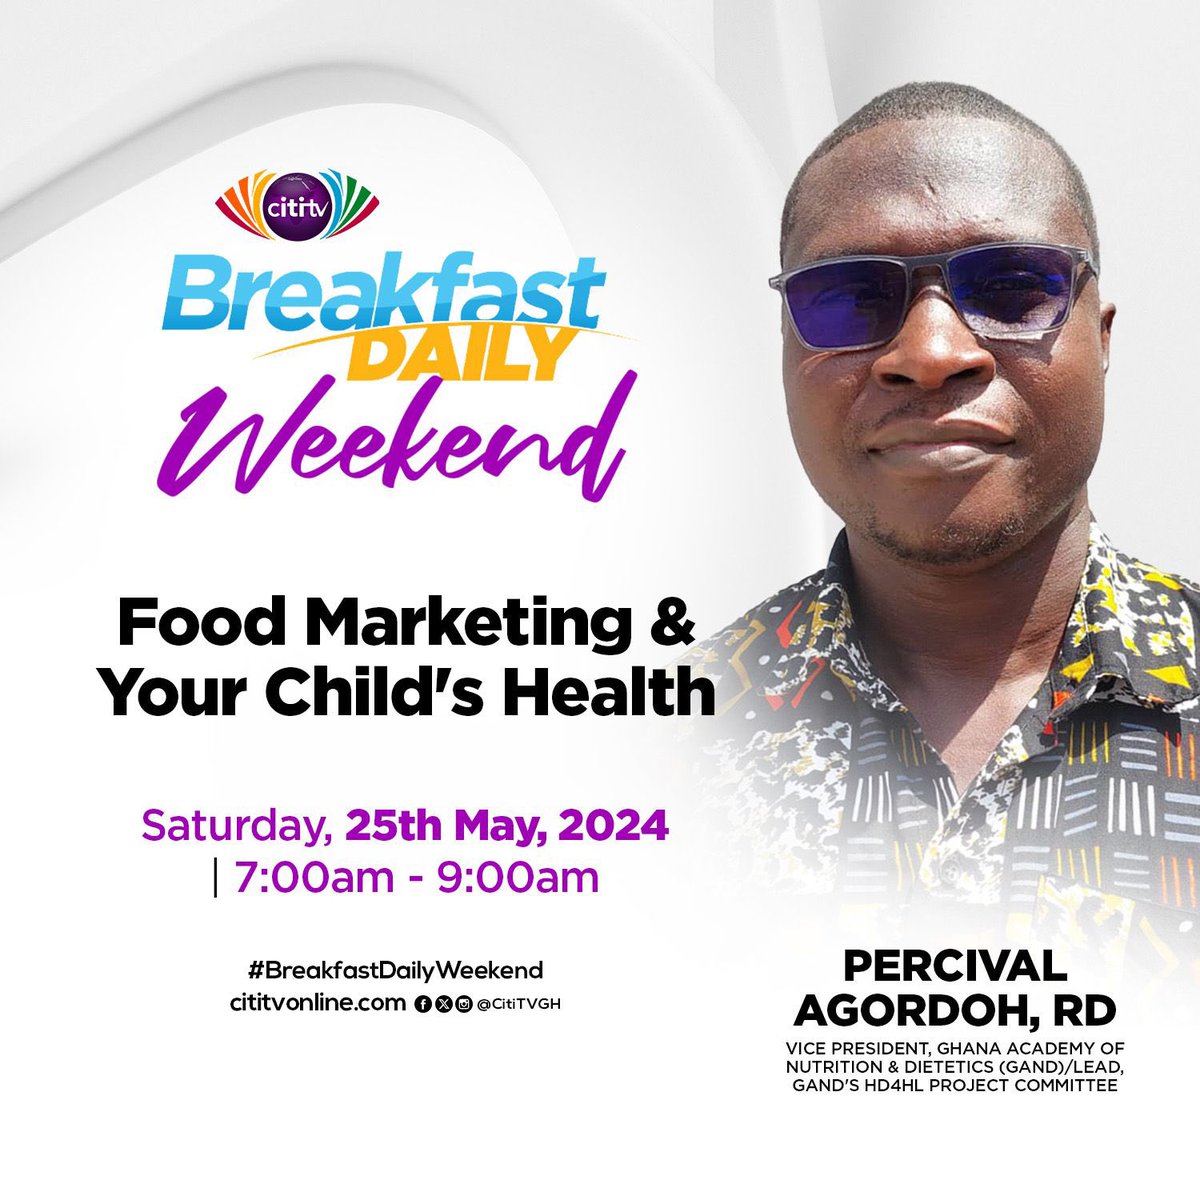 Join us this morning on #BreakfastDailyWeekend as we explore food marketing and the safety of your child’s nutrition with expert Percival Delali Agordoh, Ghana Academy of Nutrition & Dietetics(GAND). Don’t miss this insightful discussion! Live stream here: